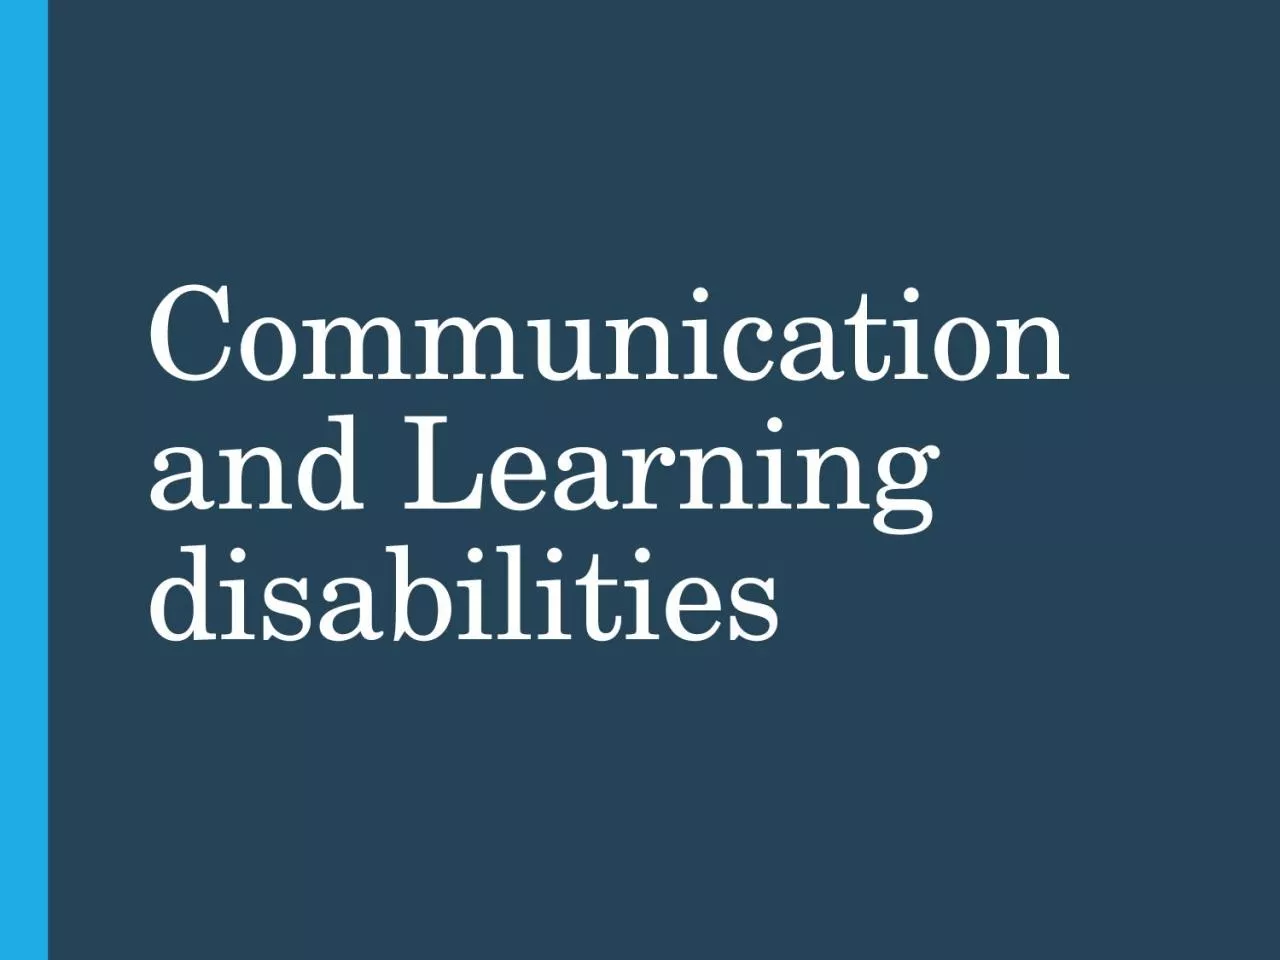 Communication and Learning disabilities